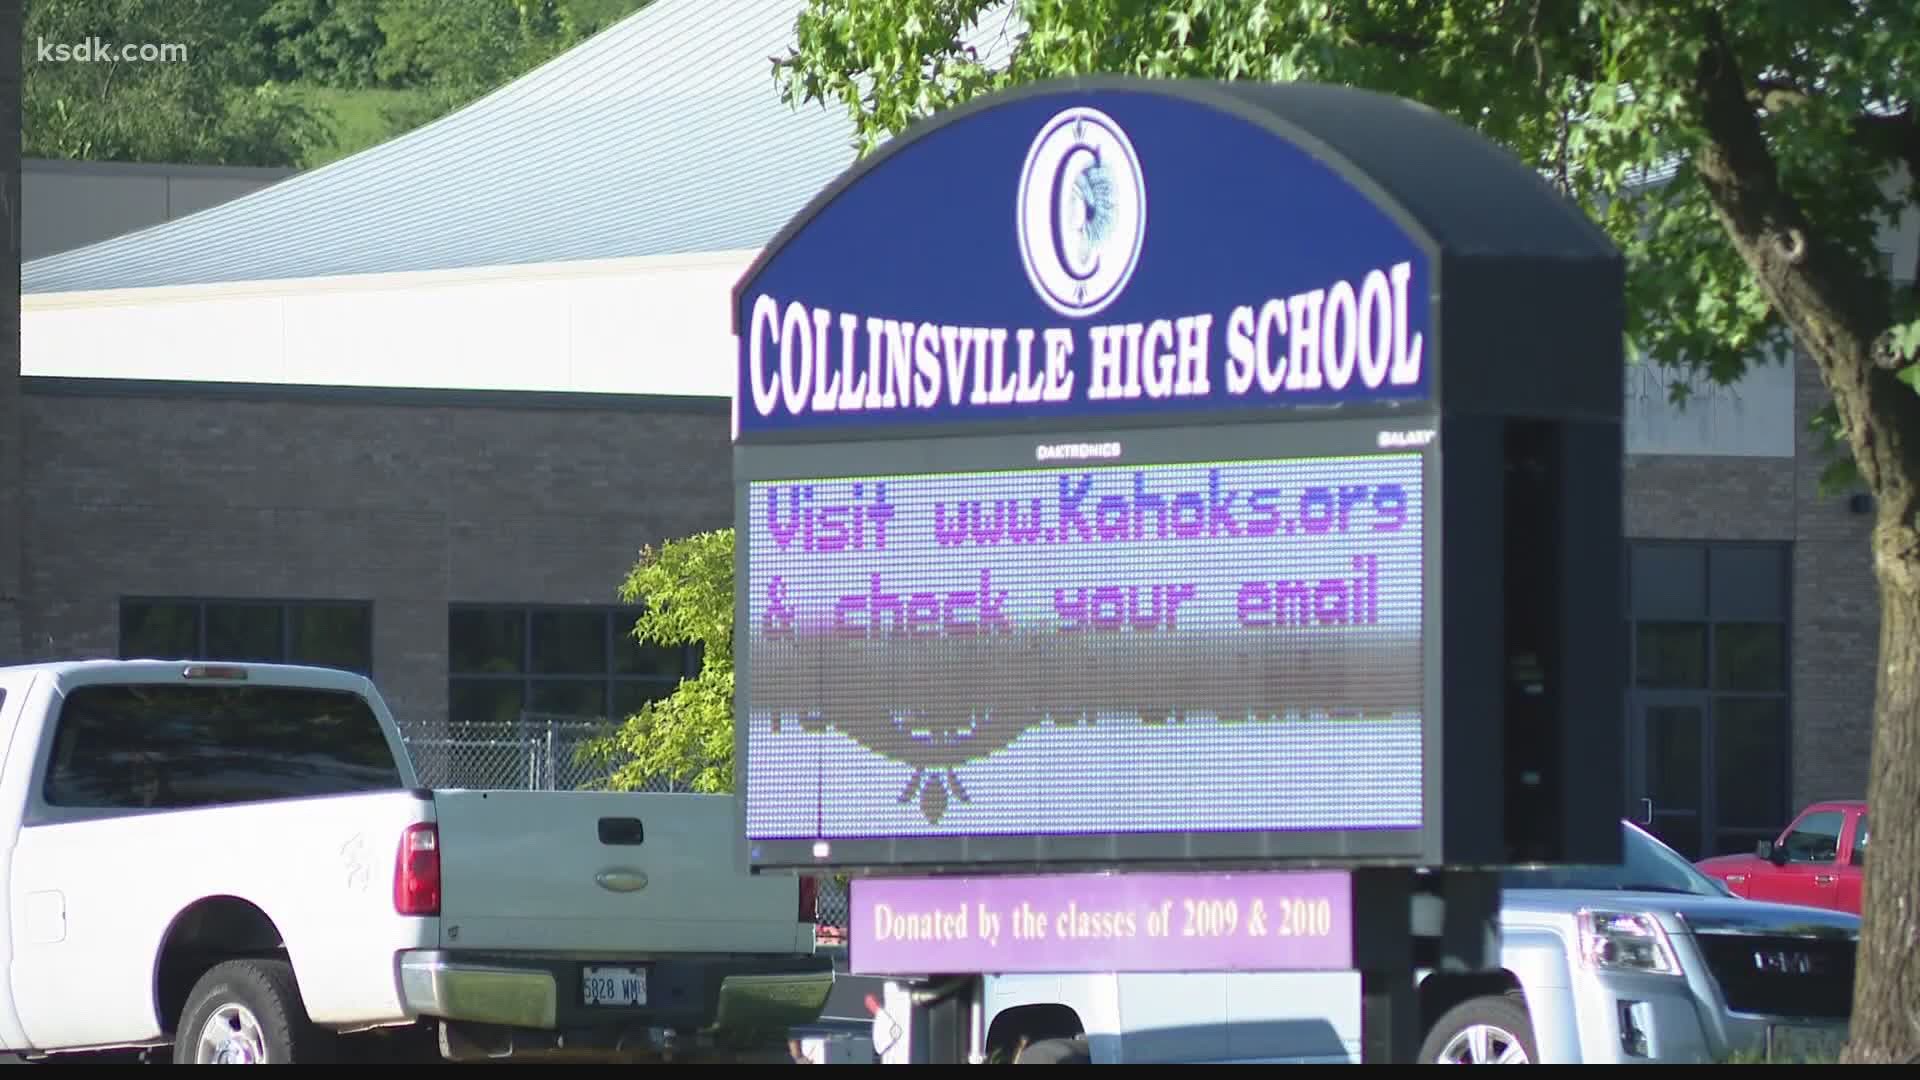 After weeks of delays, students and staff in Collinsville head back to the classroom this morning.